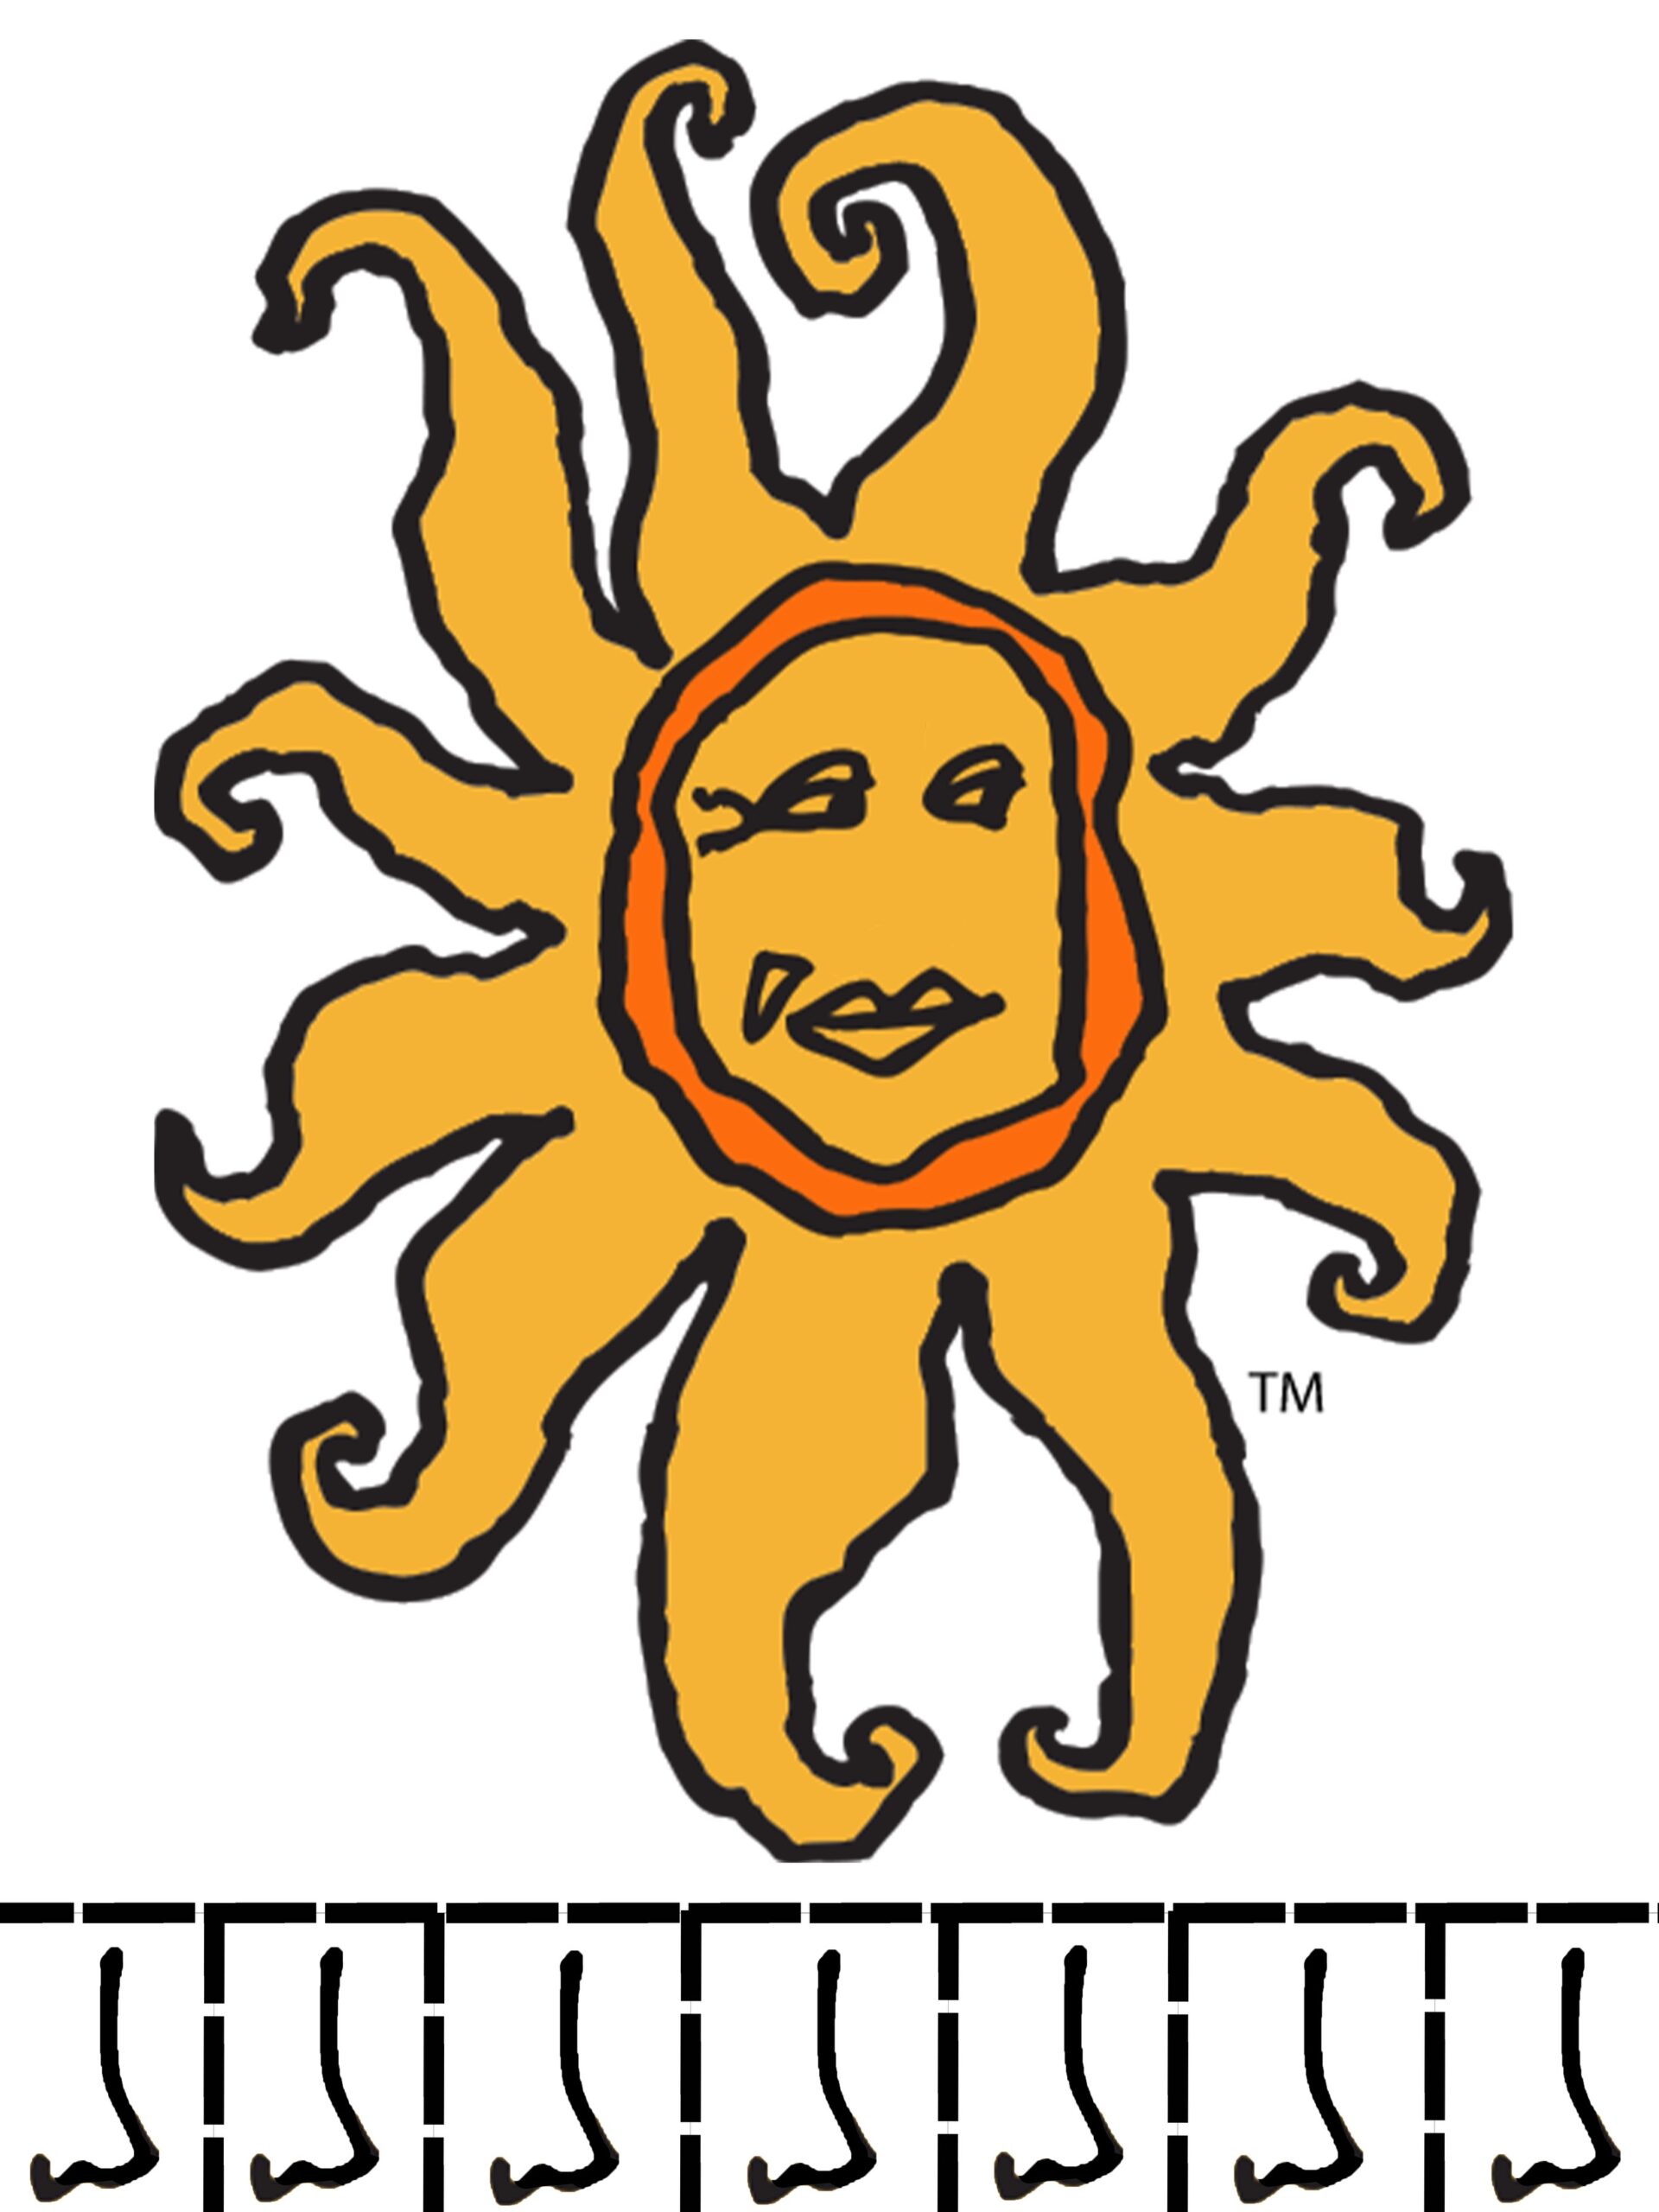 An Oberon sun graphic without the nose, with smaller nose cutouts below it